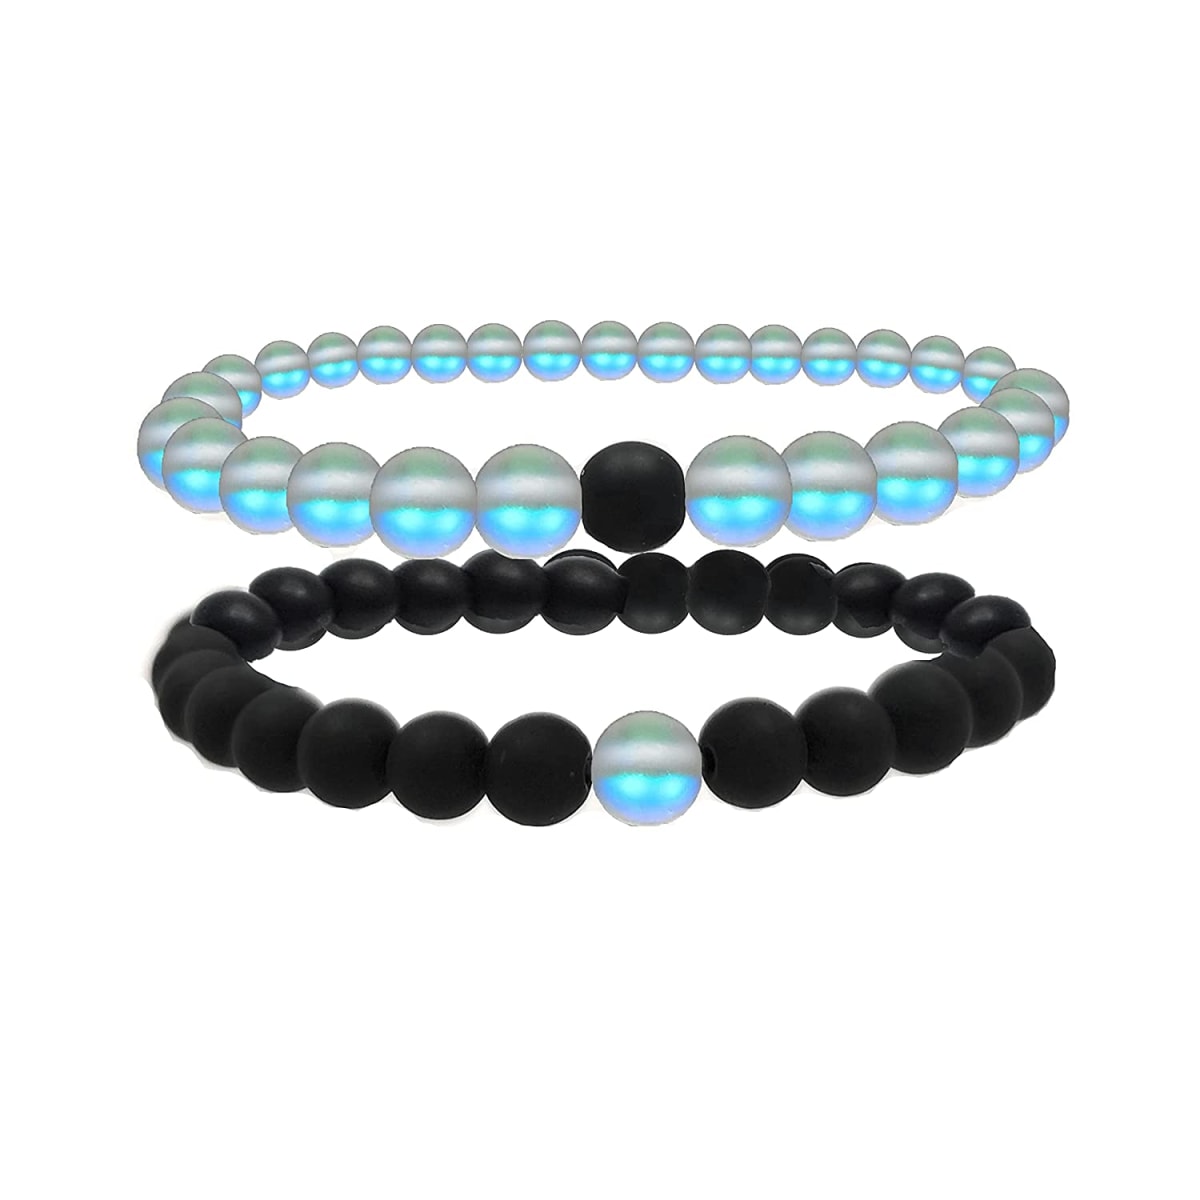 Pair of Distance Bracelets for Lovers